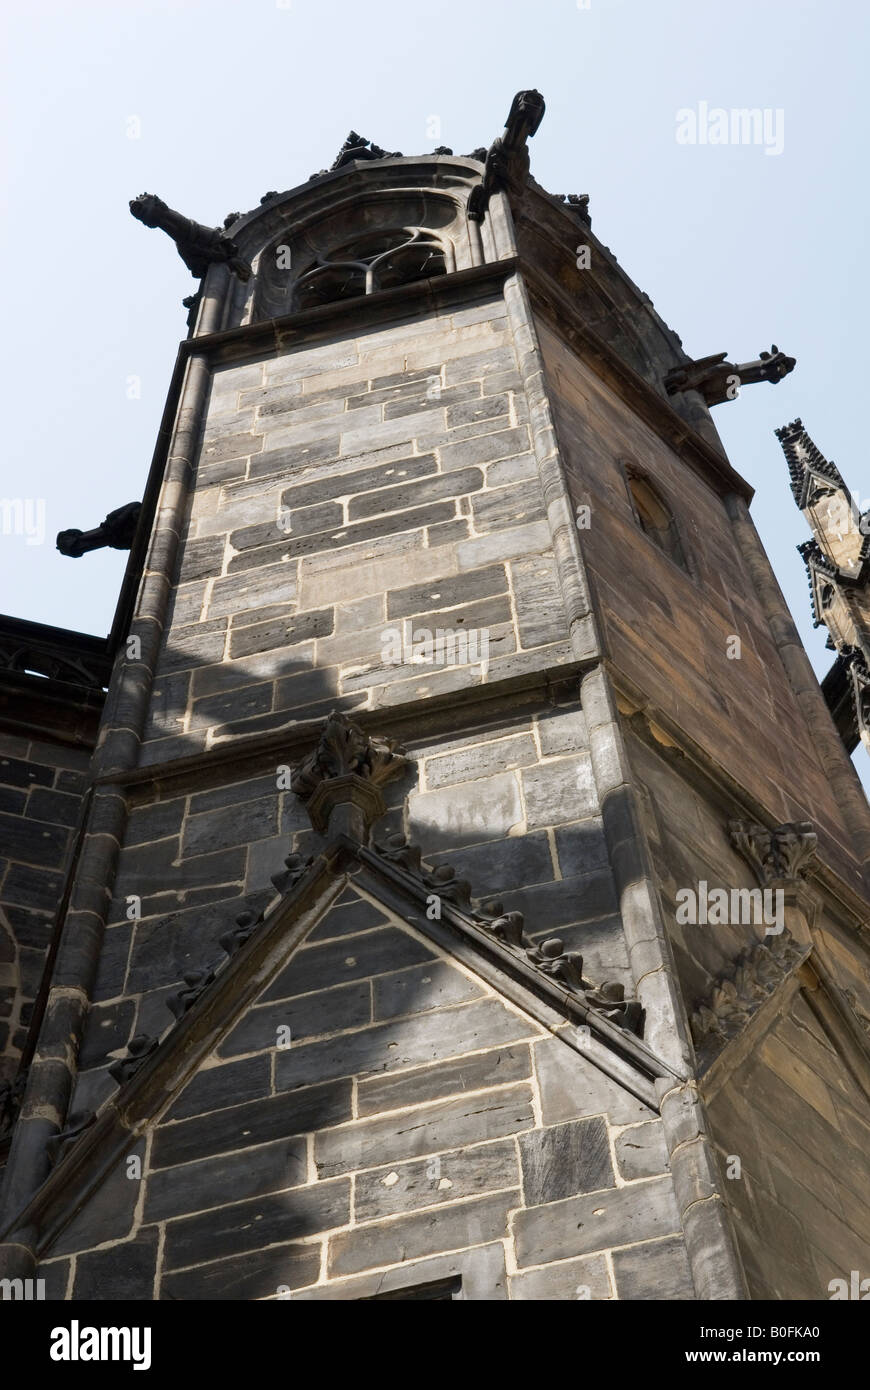 Tower with gargoyles, detail of St. Vitus Cathedral, Prague Castle, Czech Republic Stock Photo